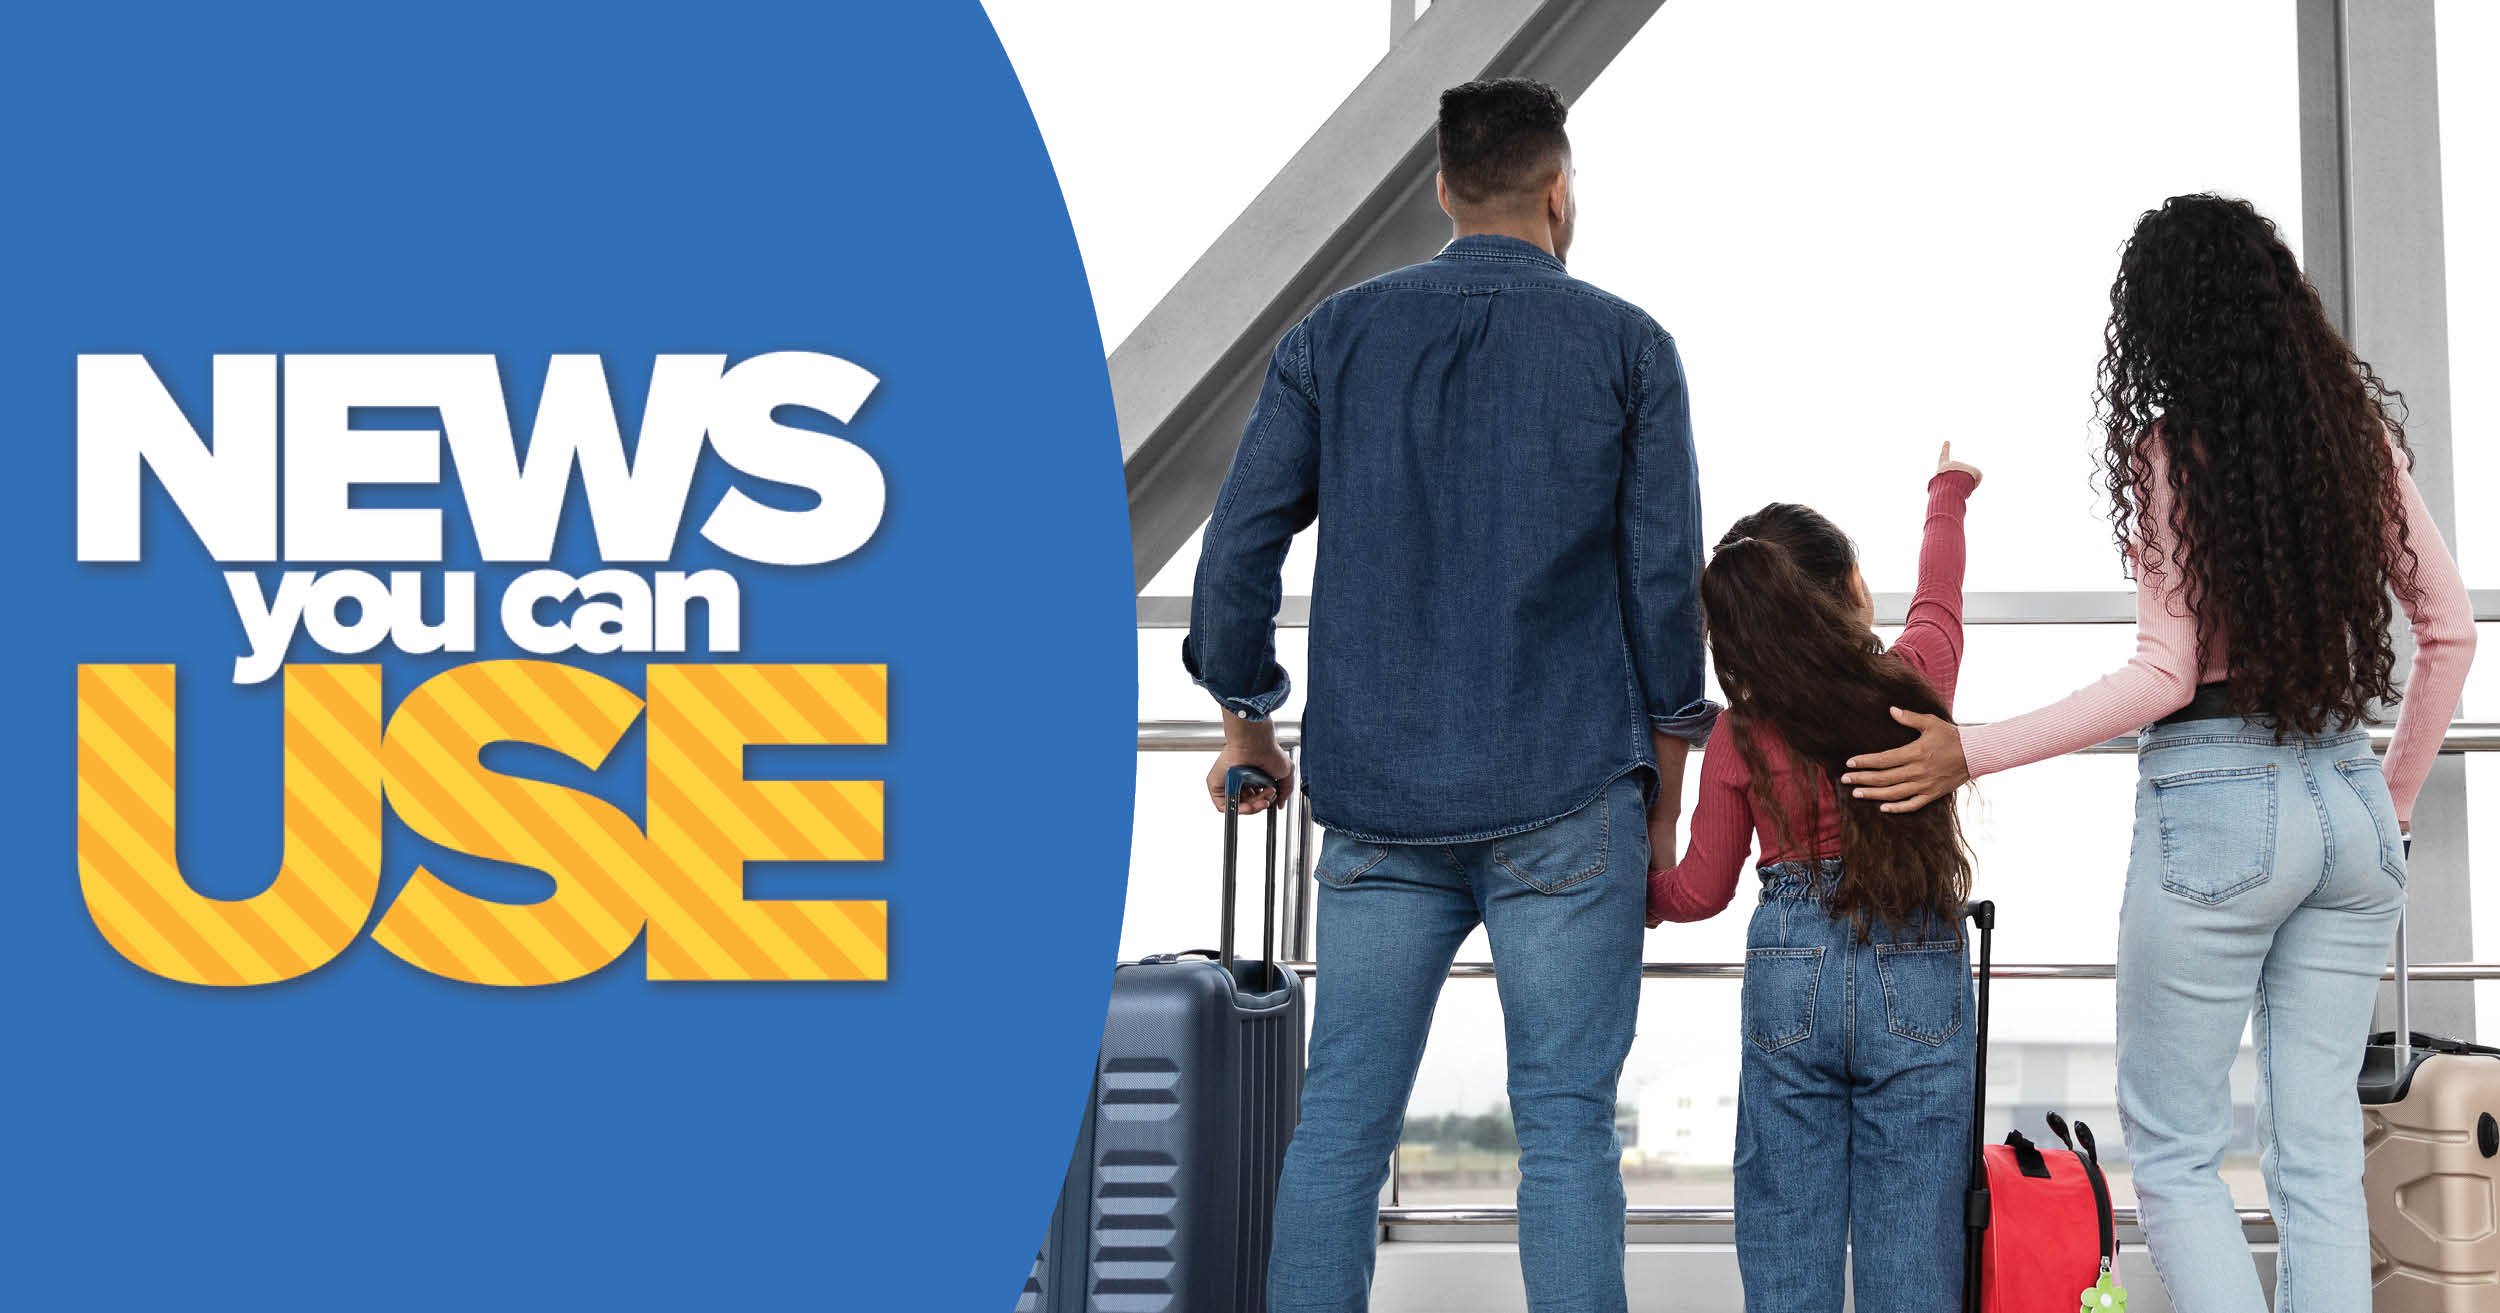 News you can use with a blue background, family at the airport looking at the tarmac